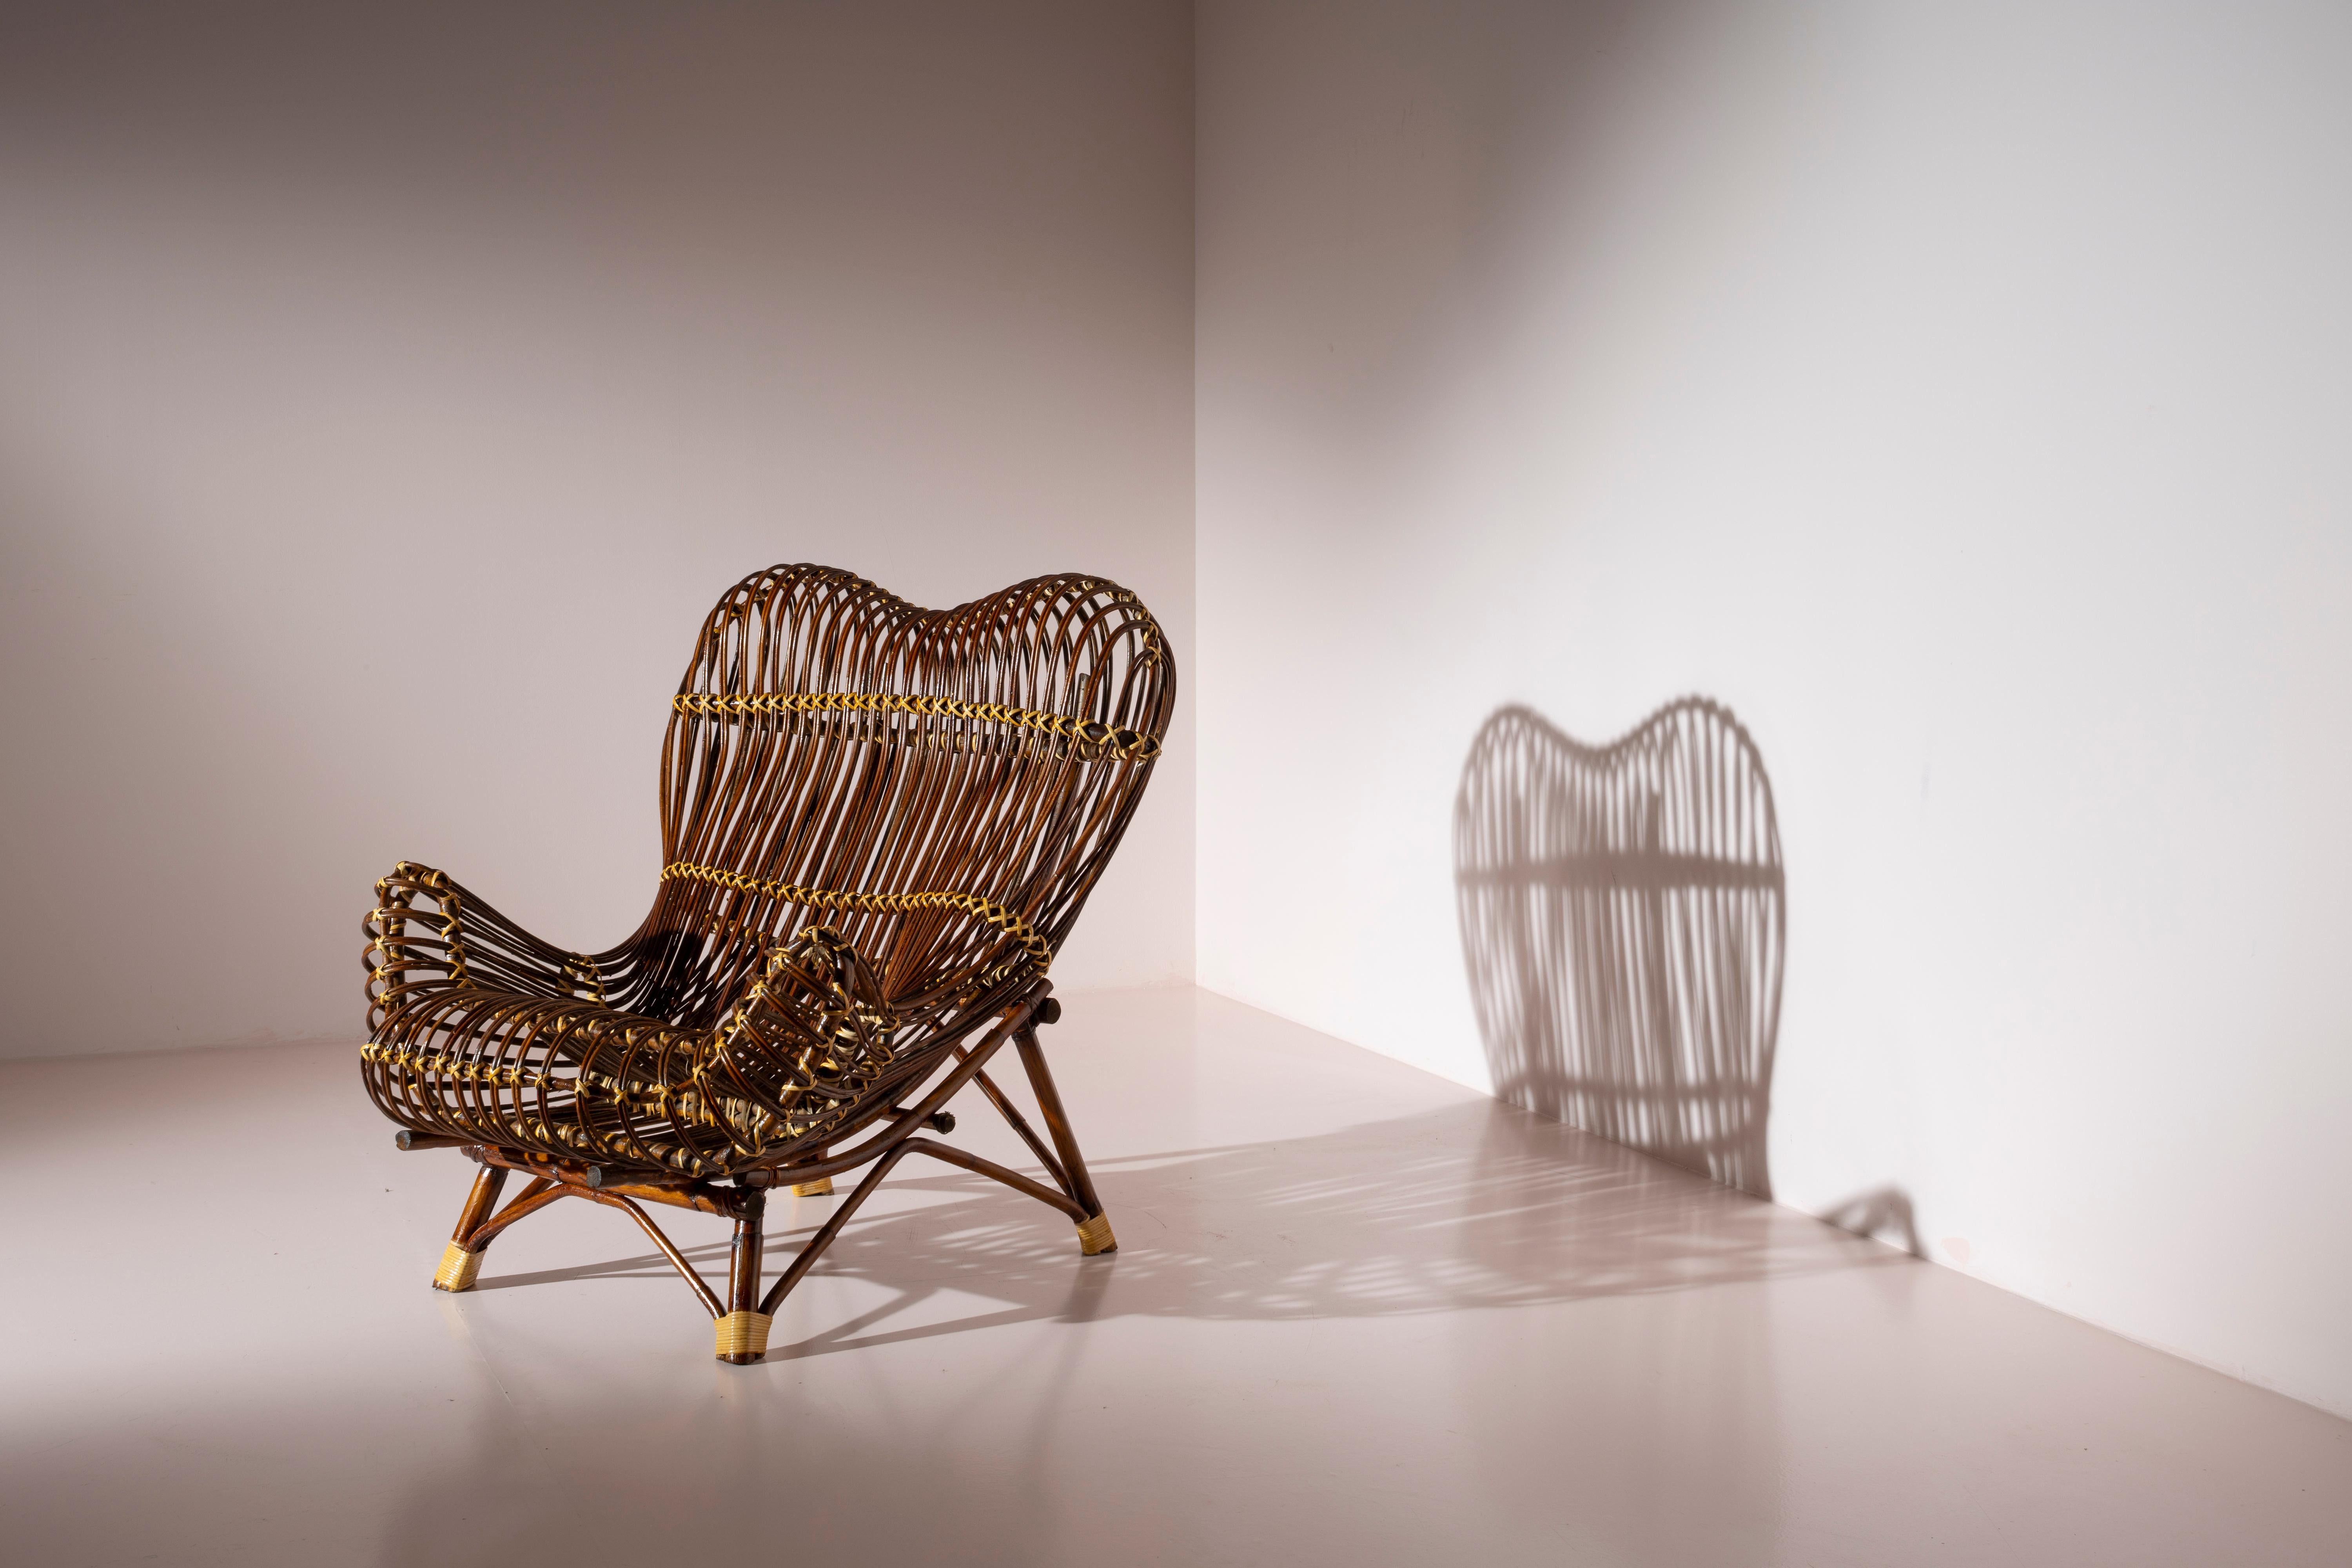 A beautiful chair in bamboo and straw, Gala model, designed by Franco Albini in 1951, produced by Bonacina.

The Gala chair, designed in 1951, embodies all the desires for novelty and progress necessary to move away from the rubble of the war that